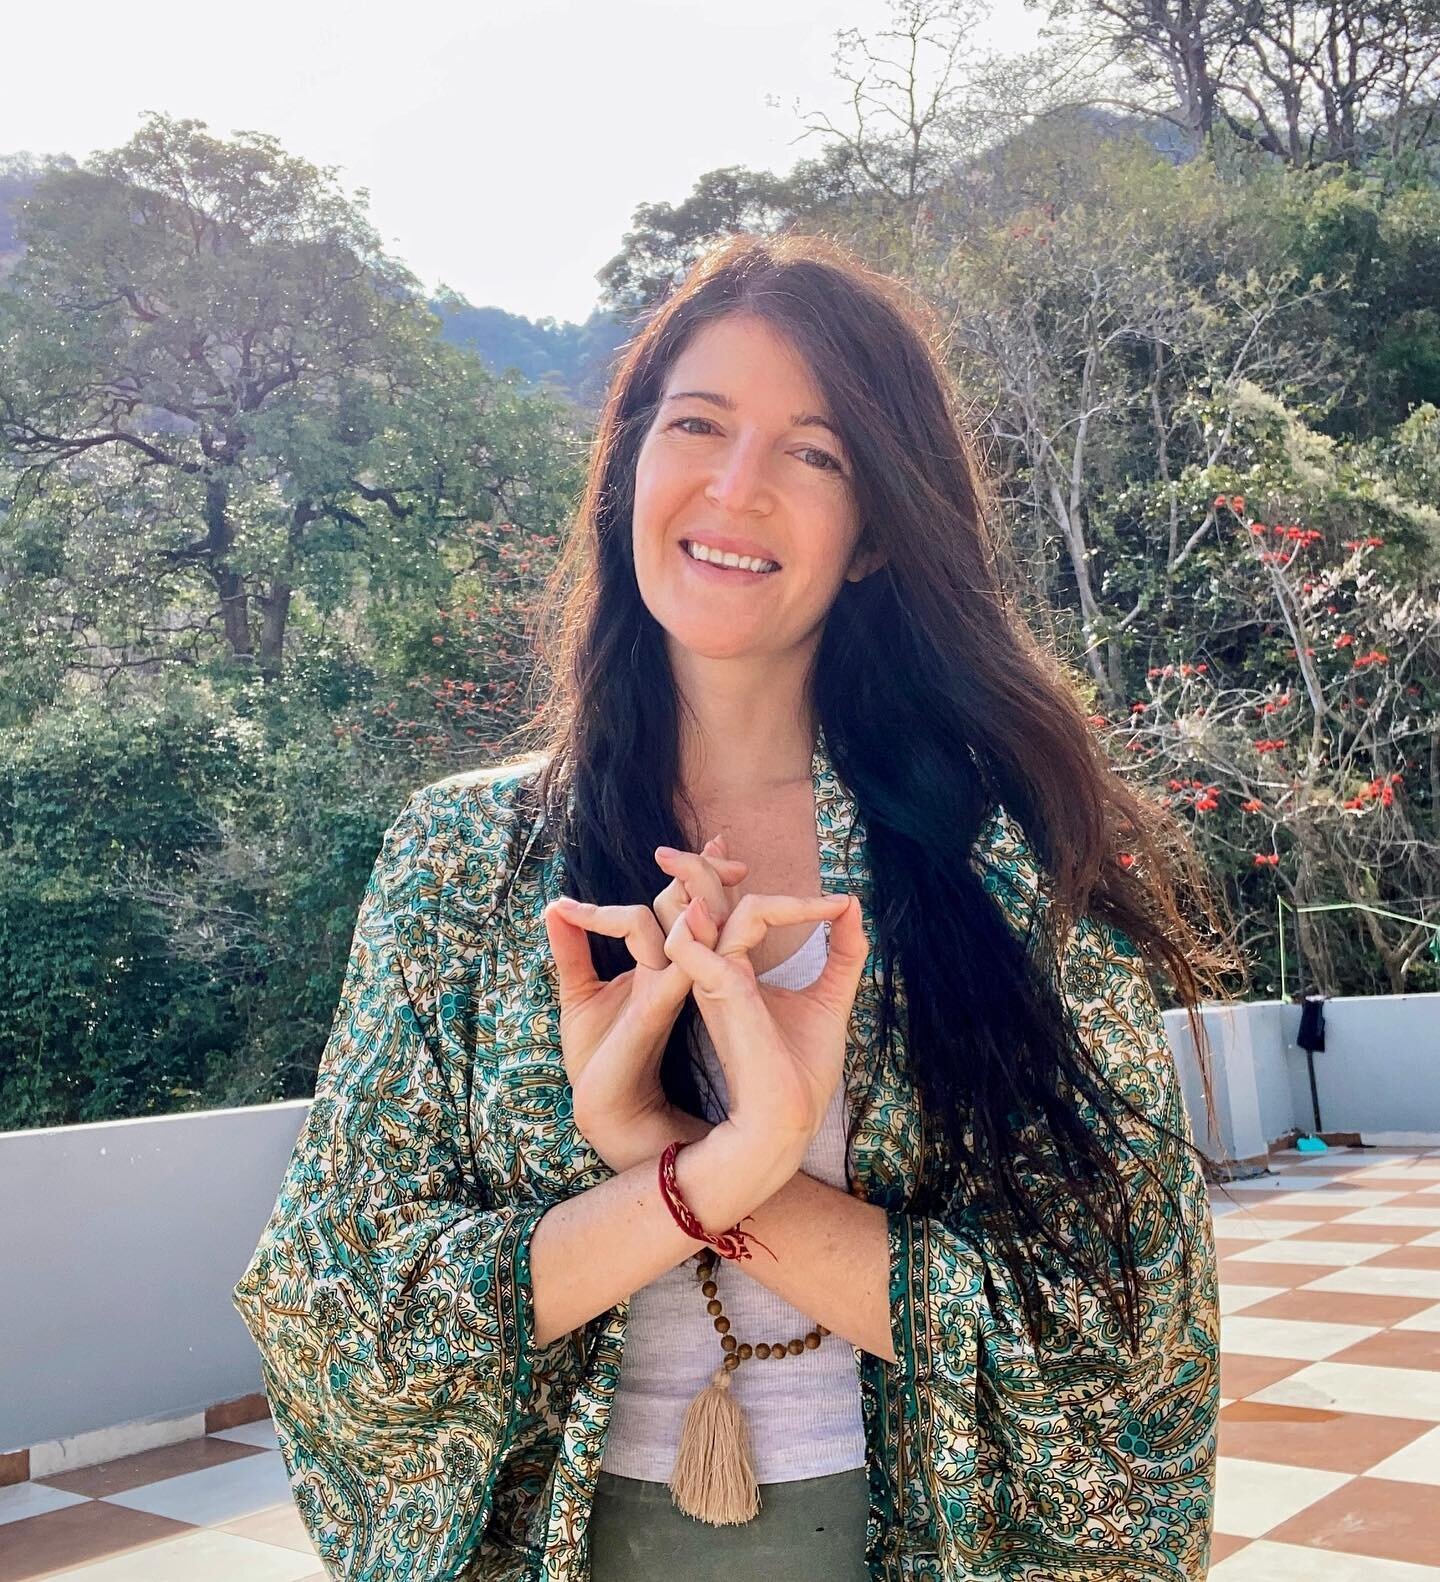 Stepping into my 37th trip around the sun holding Abhaya Hridaya, &lsquo;Fearless Heart Mudra&rsquo; at my chest, as I continue to allow my heart to be my guide. 

Deeply grateful for the expansive year that&rsquo;s been and so open and ready for mag